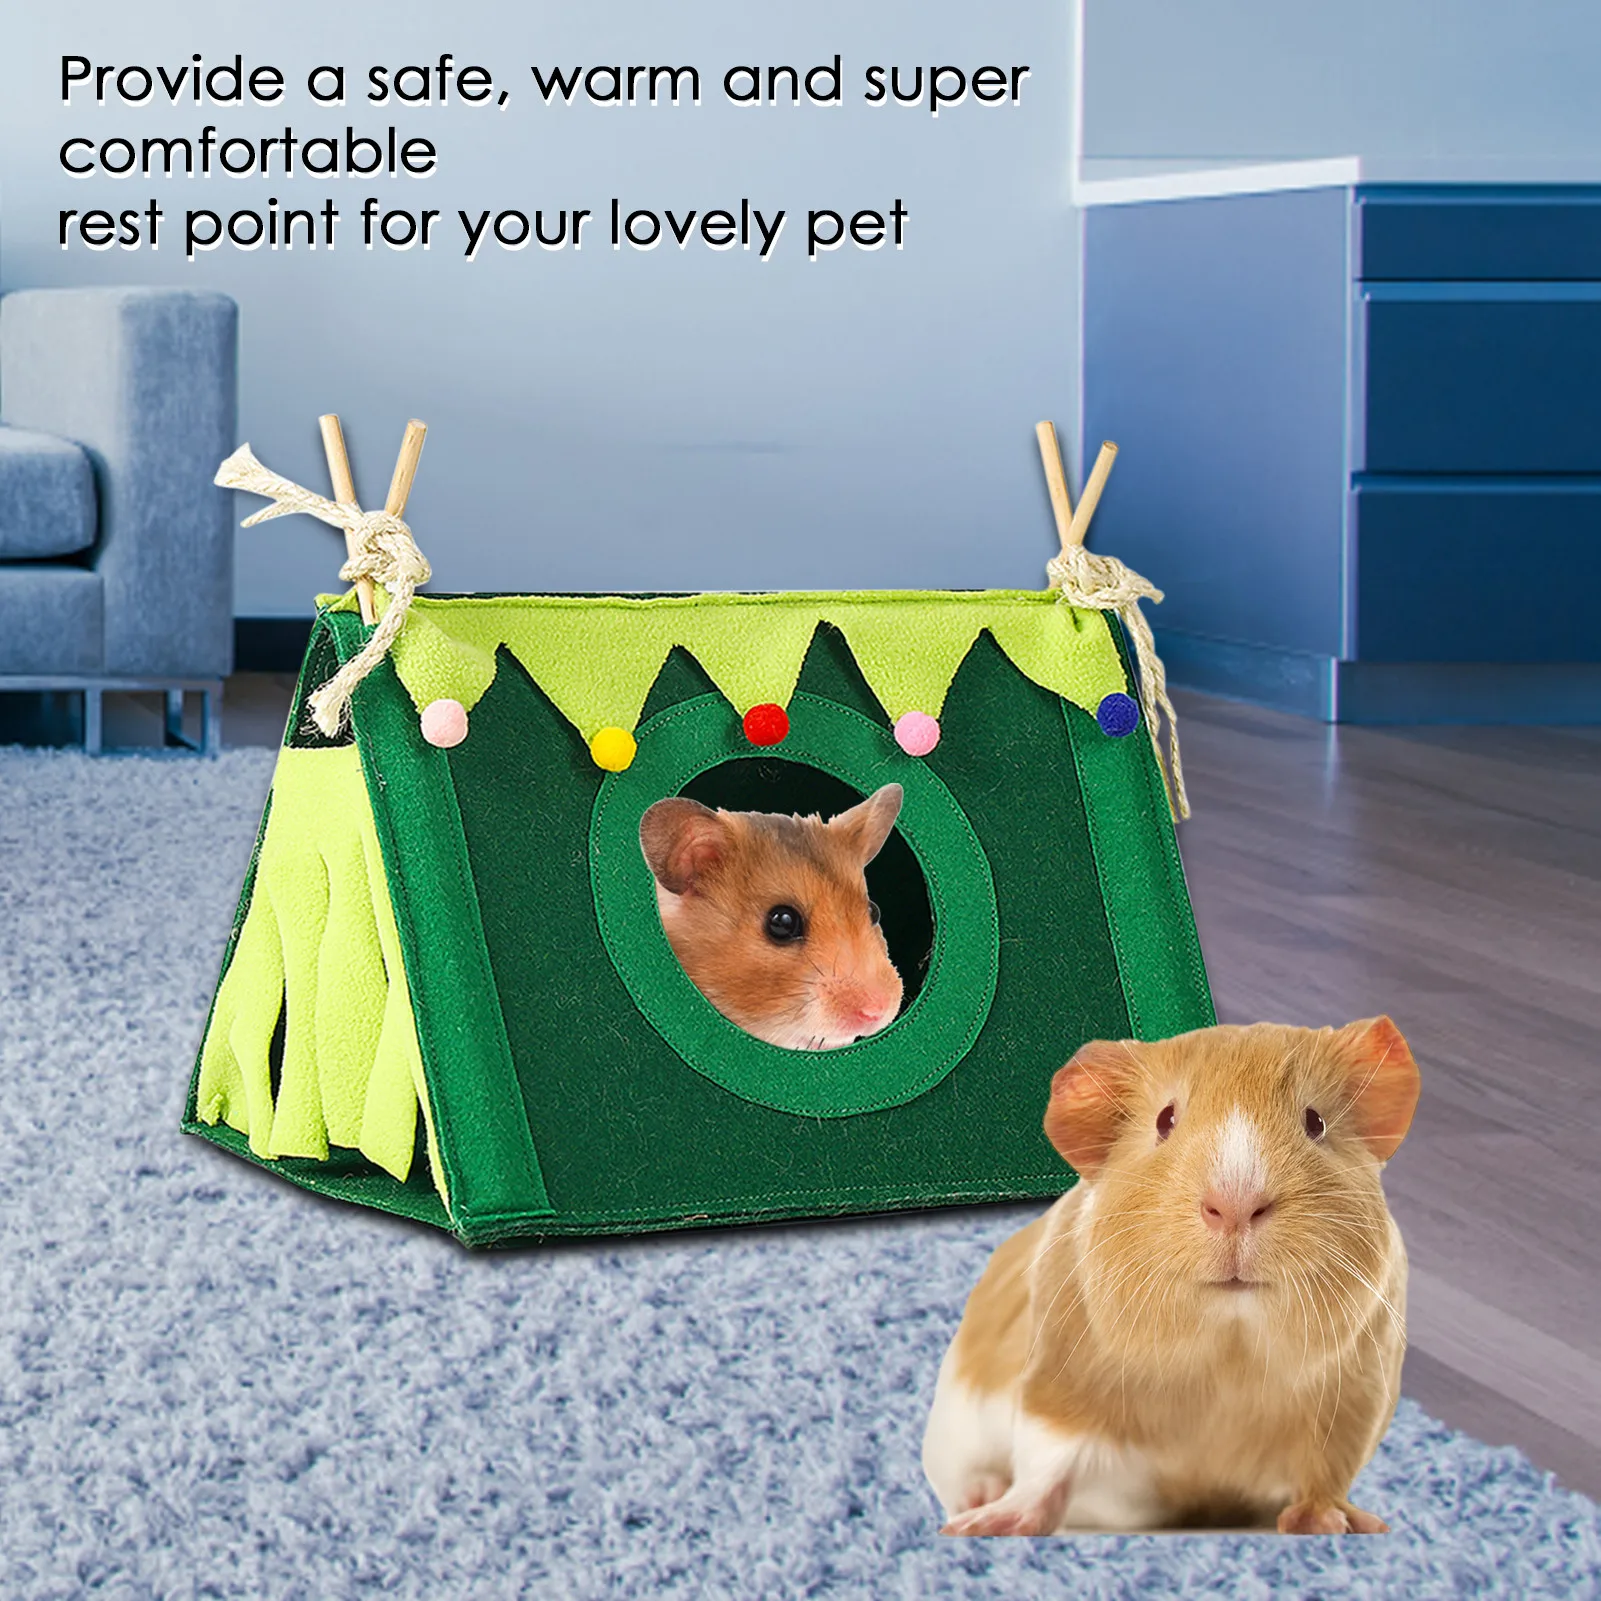 

Small Pet Nest Felt Tent Rabbit Nest Hamster House Hamster Cage Large Guinea Pig Cage Guinea Pig Small Animal Bed Accessories